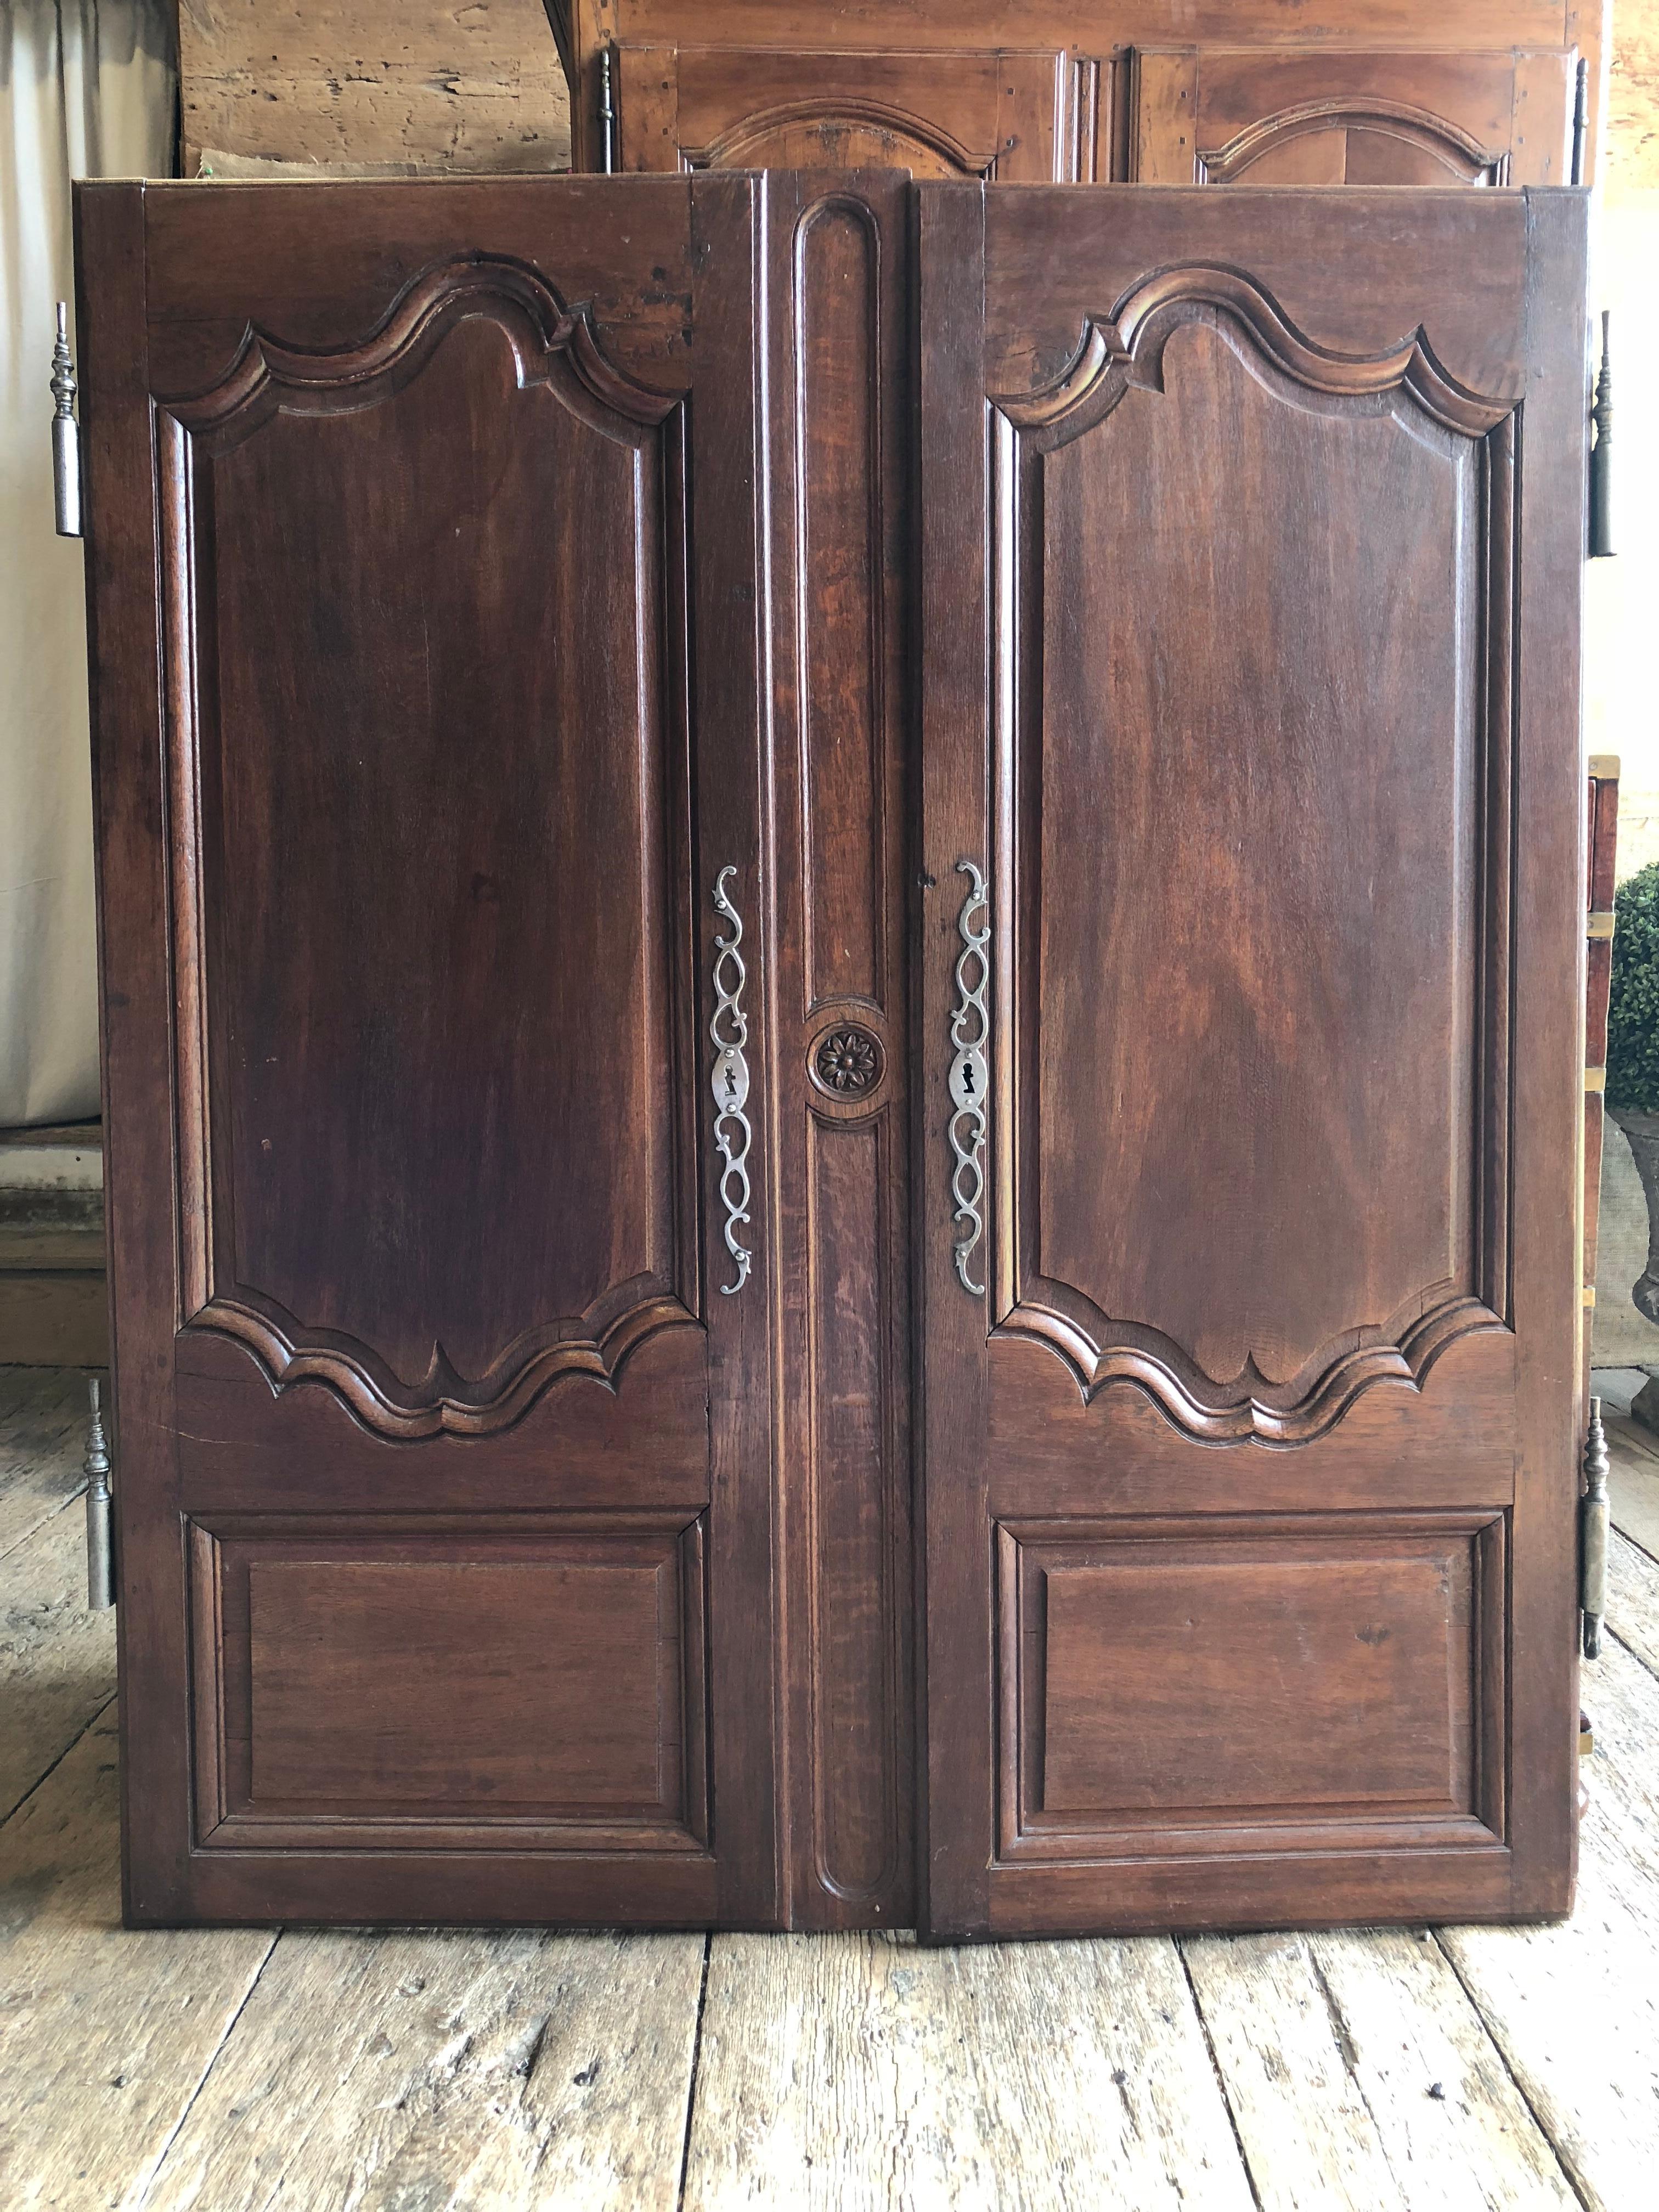 A pair of French Louis XV armoire doors in oak, circa 1790, nicely panelled and retaining their original steel hardware.
The centre divider (currently attached to the lady side door) can be removed to create a pair of equal sized doors. Width